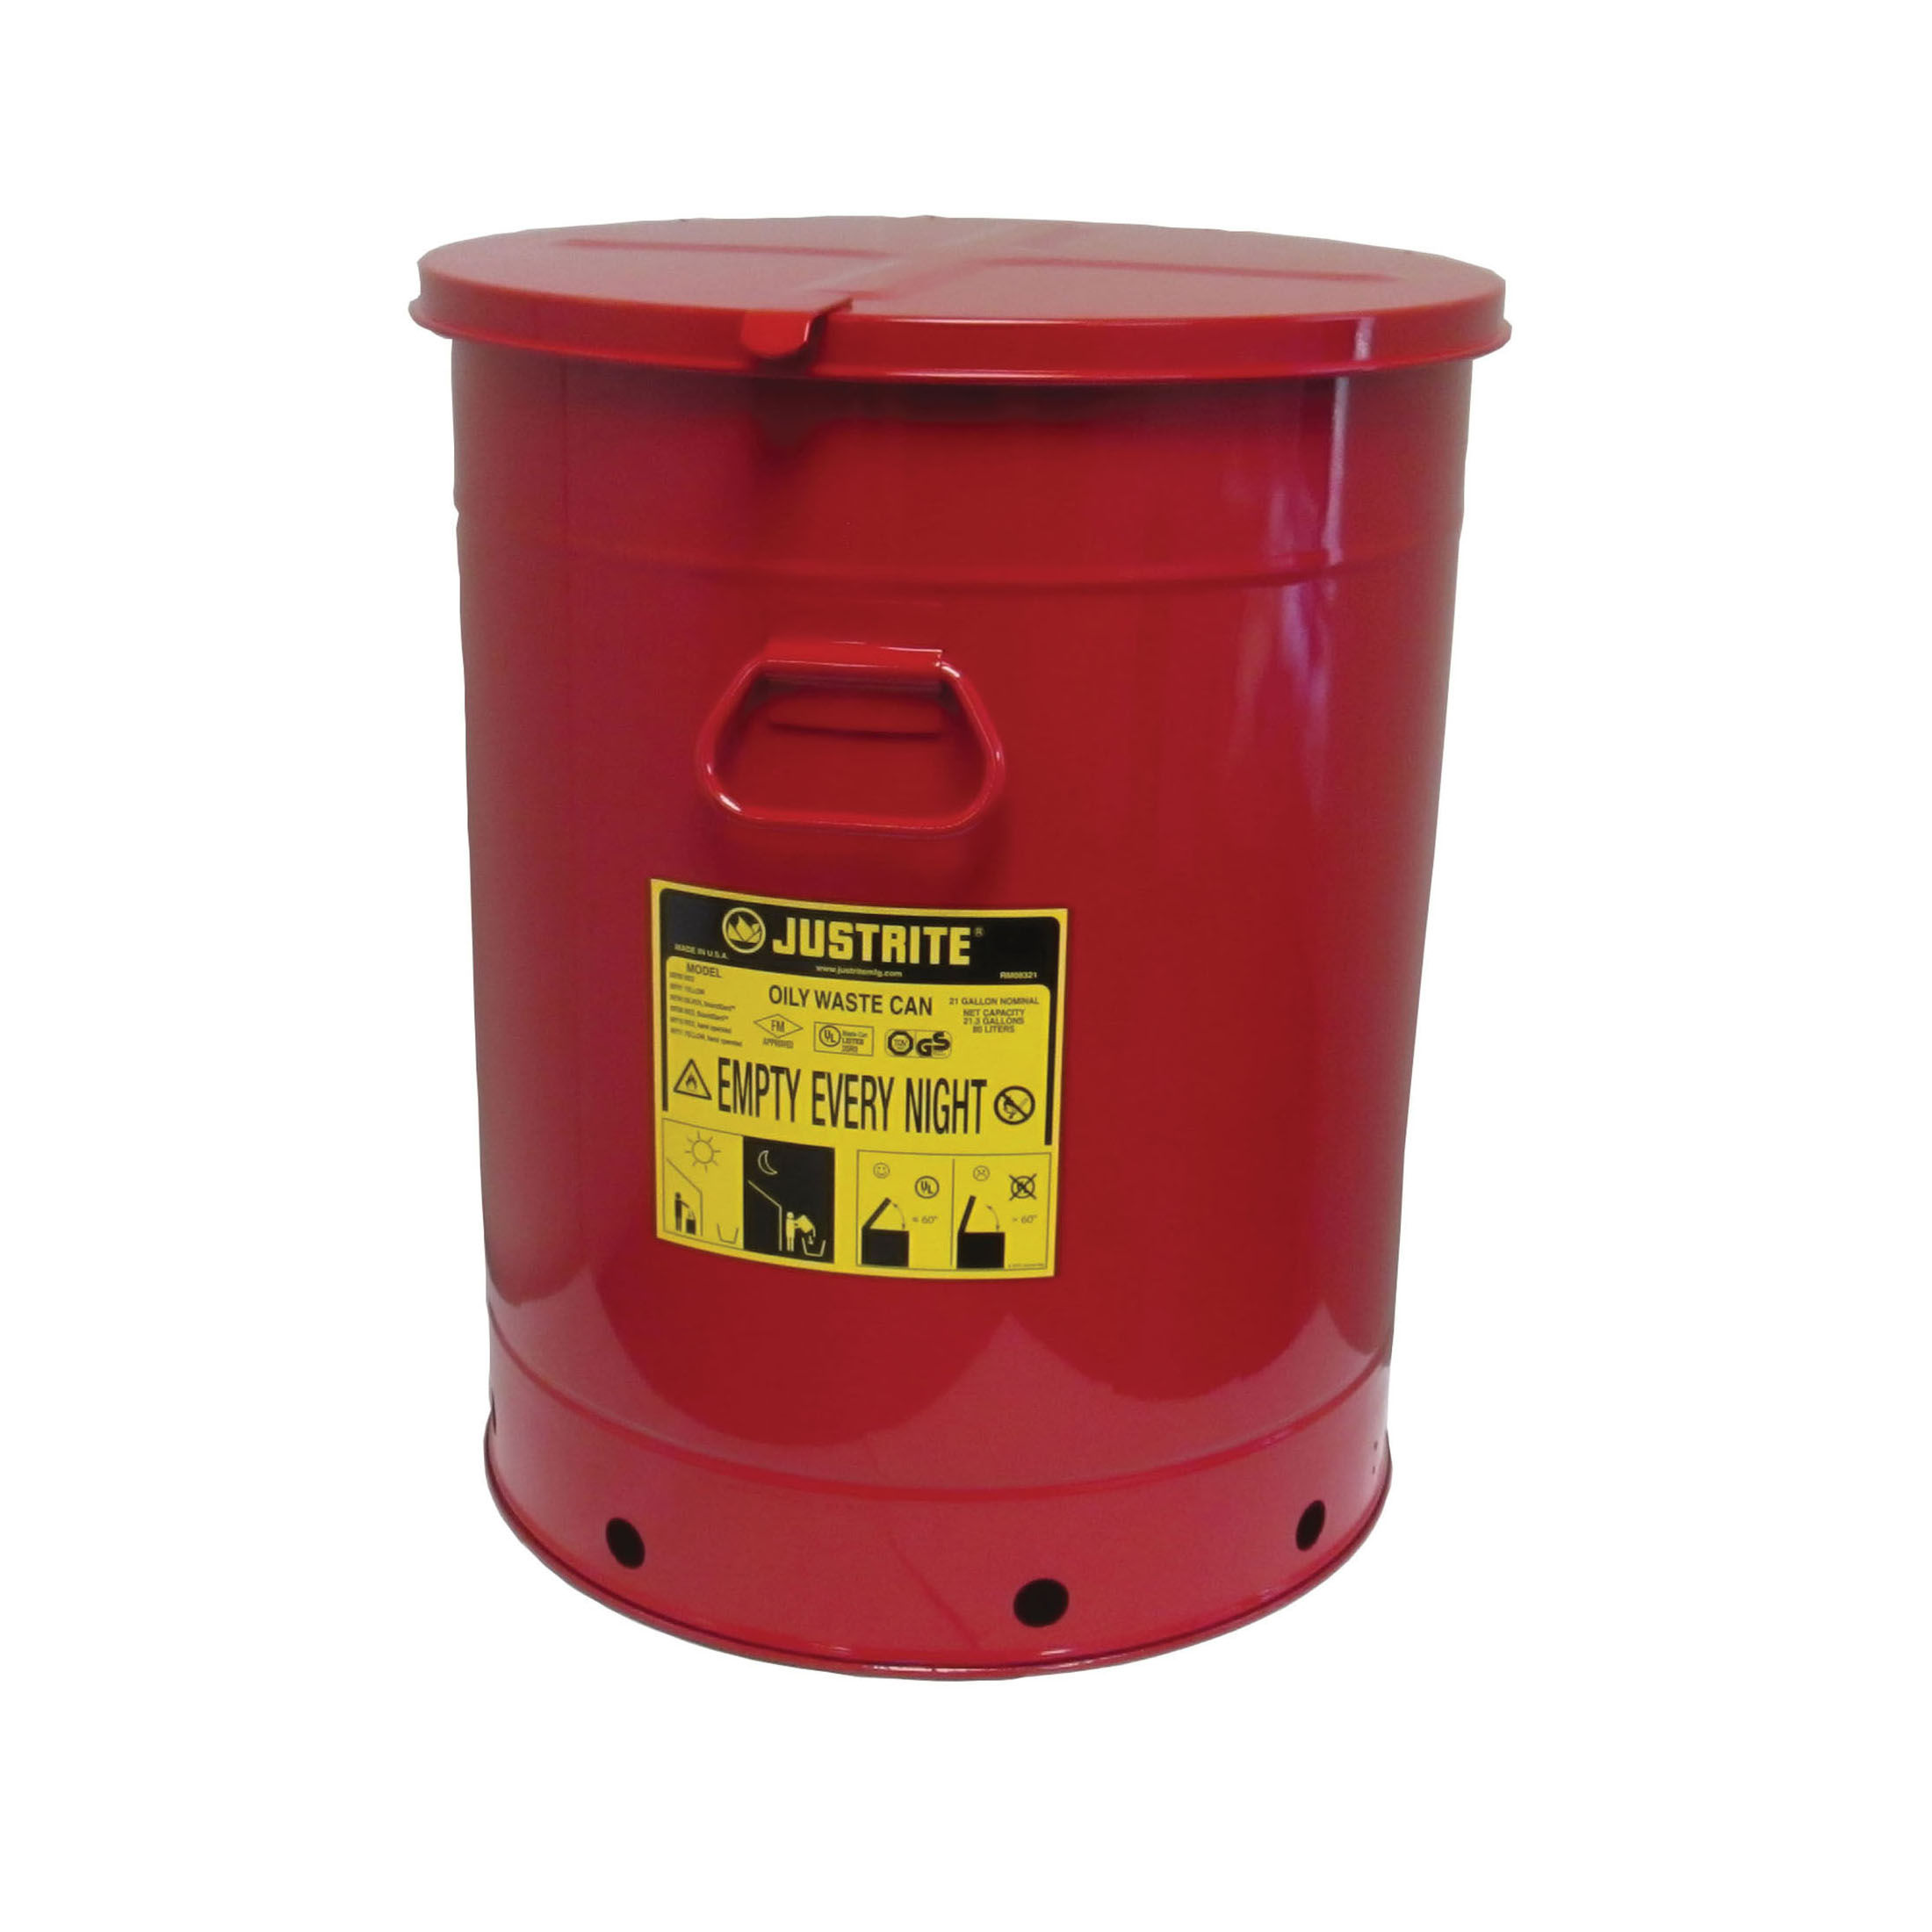 Justrite® 09700 Foot Operated Oily Waste Can, 21 gal Capacity, 18-3/8 in Dia x 23-7/16 in H, Galvanized Steel, Red